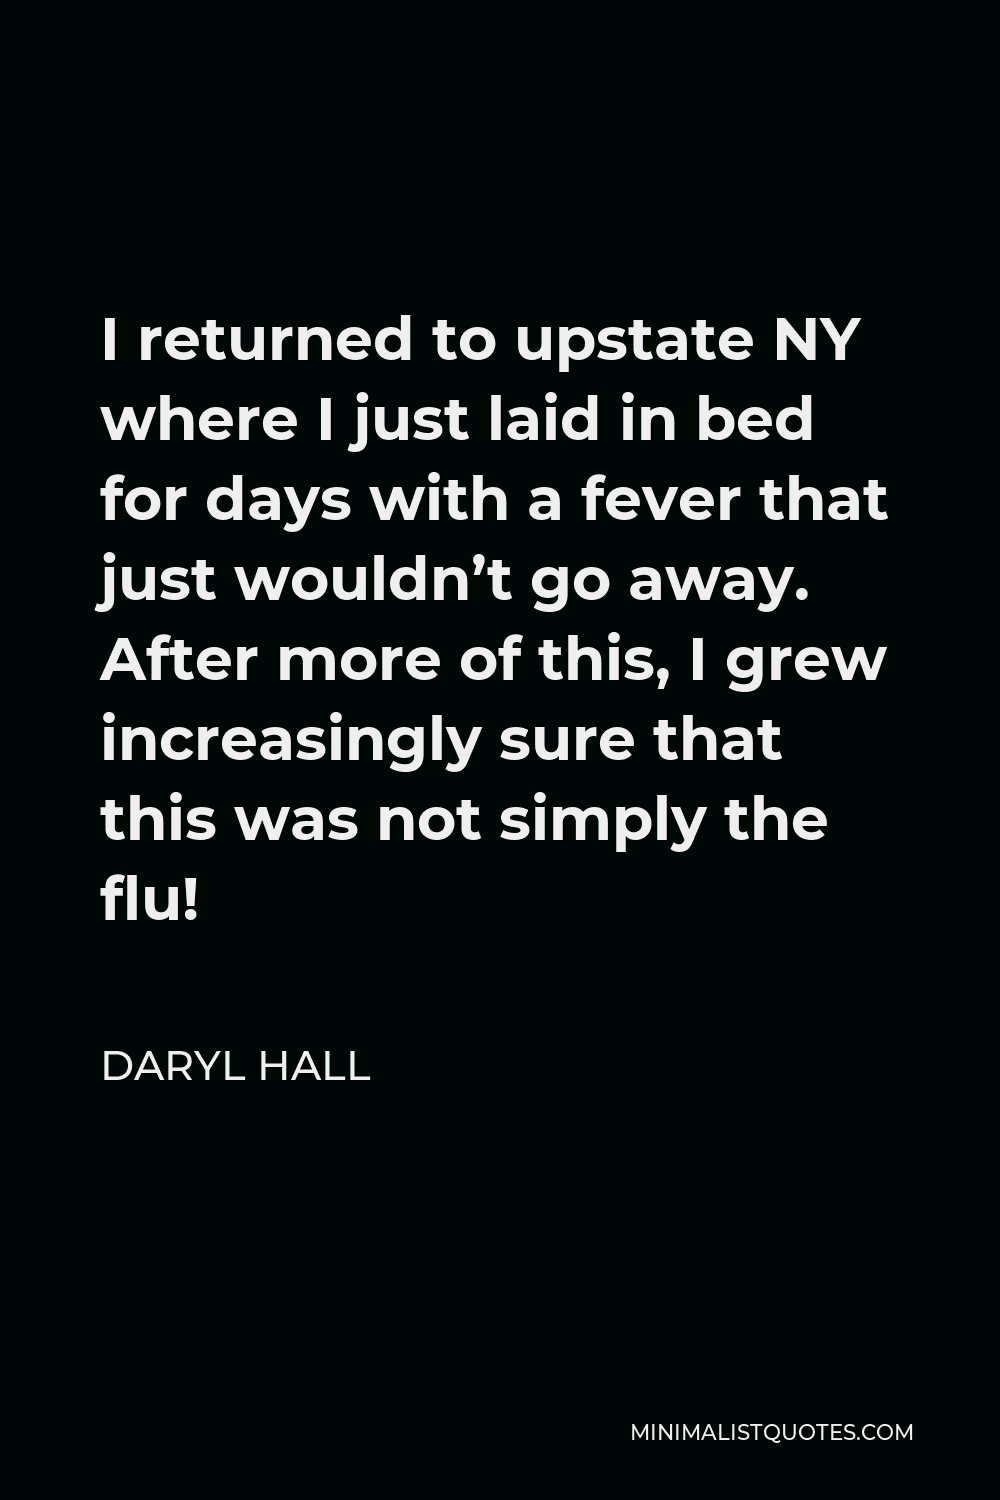 Daryl Hall Quote - I returned to upstate NY where I just laid in bed for days with a fever that just wouldn’t go away. After more of this, I grew increasingly sure that this was not simply the flu!